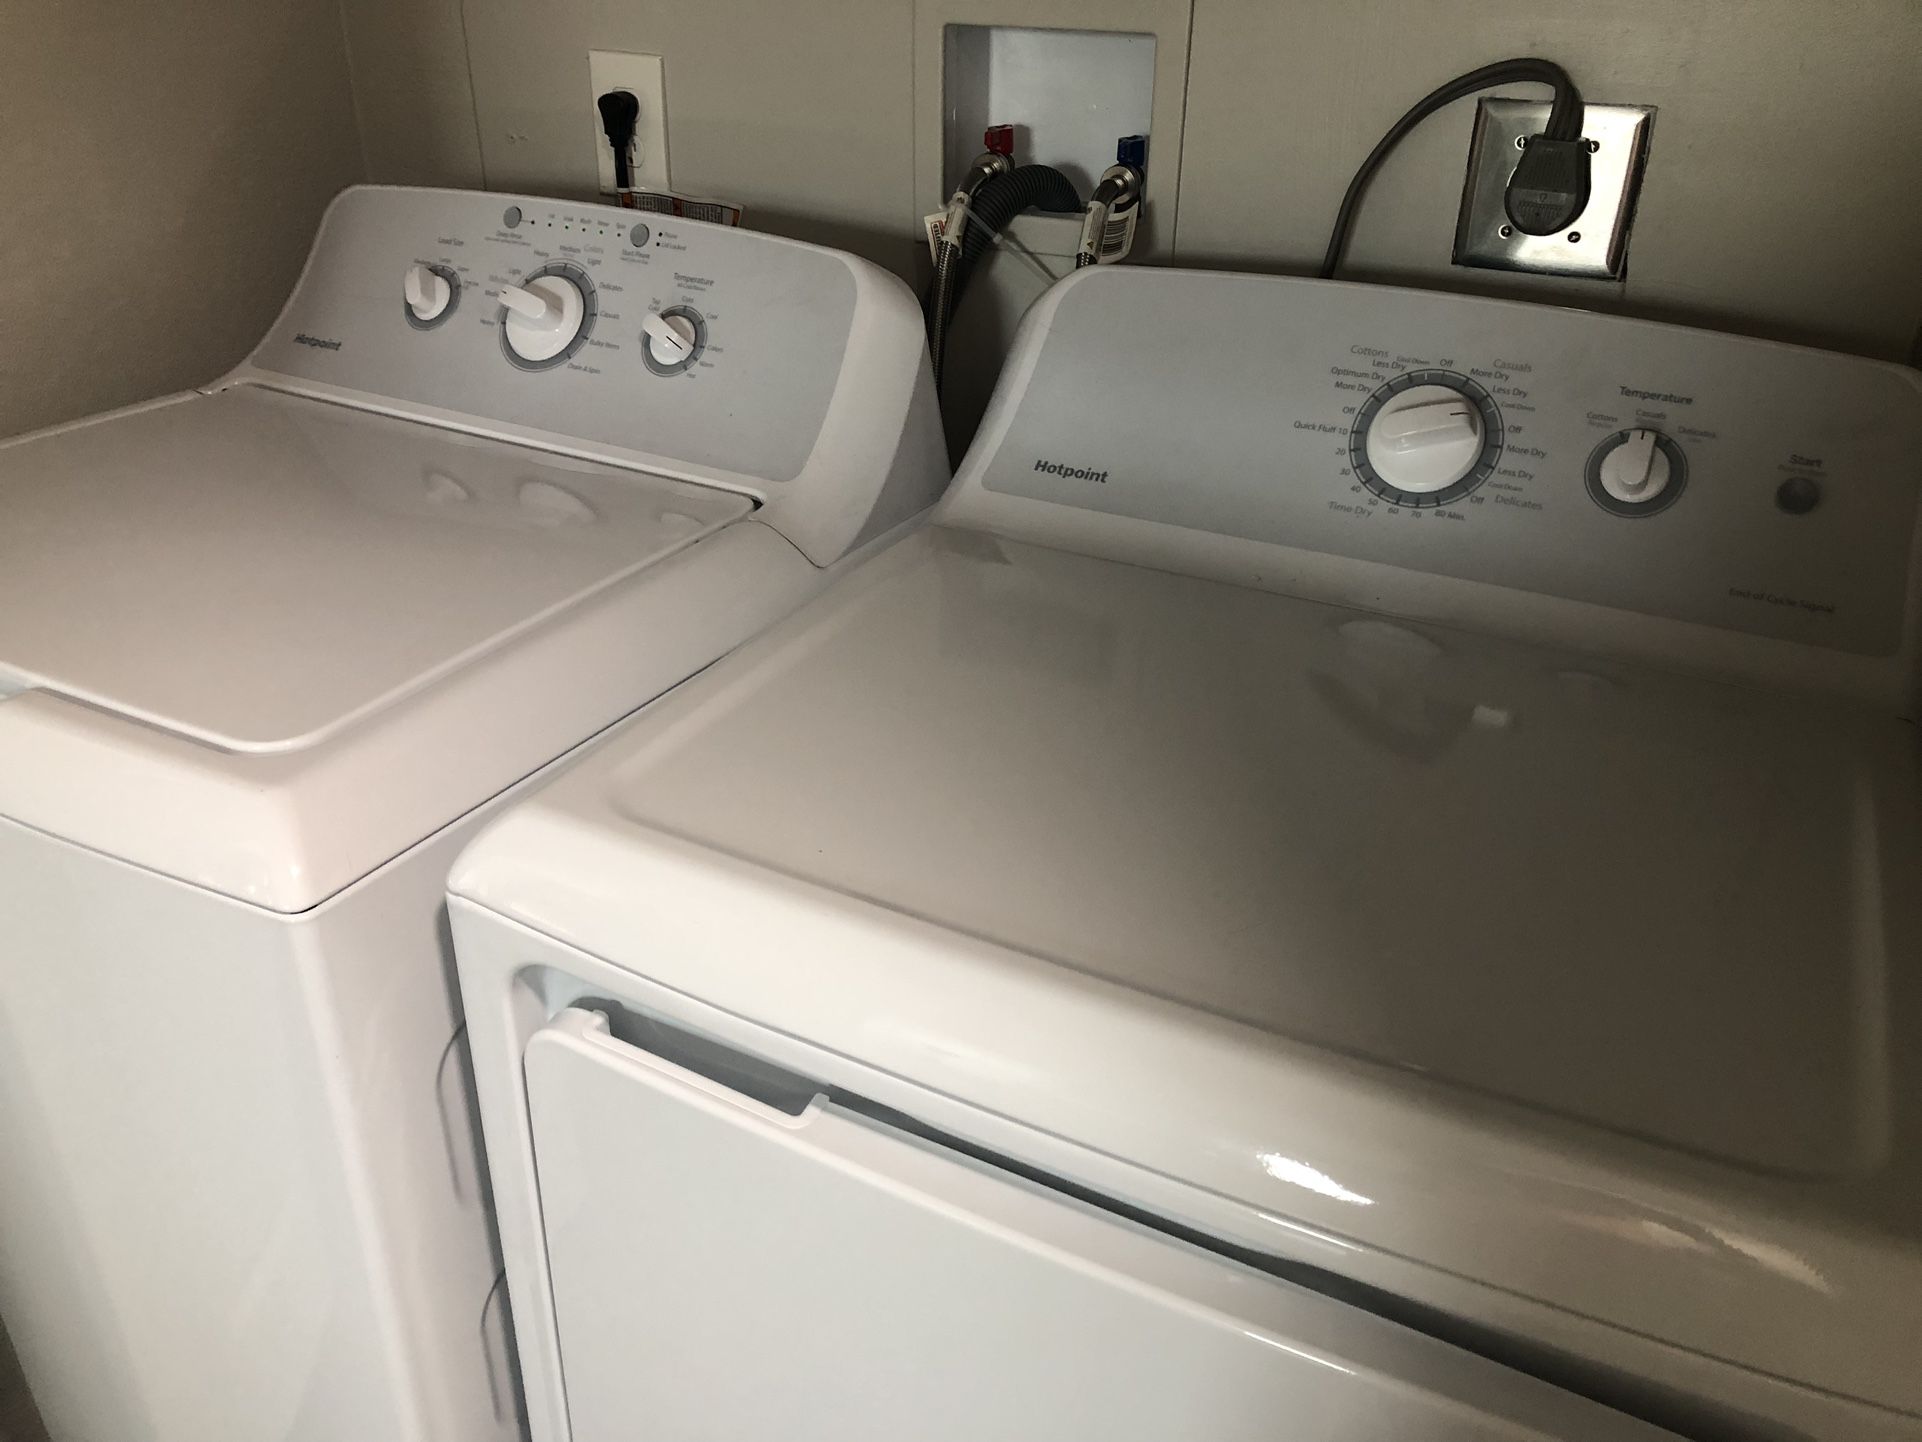 NEW Washer and Dryer